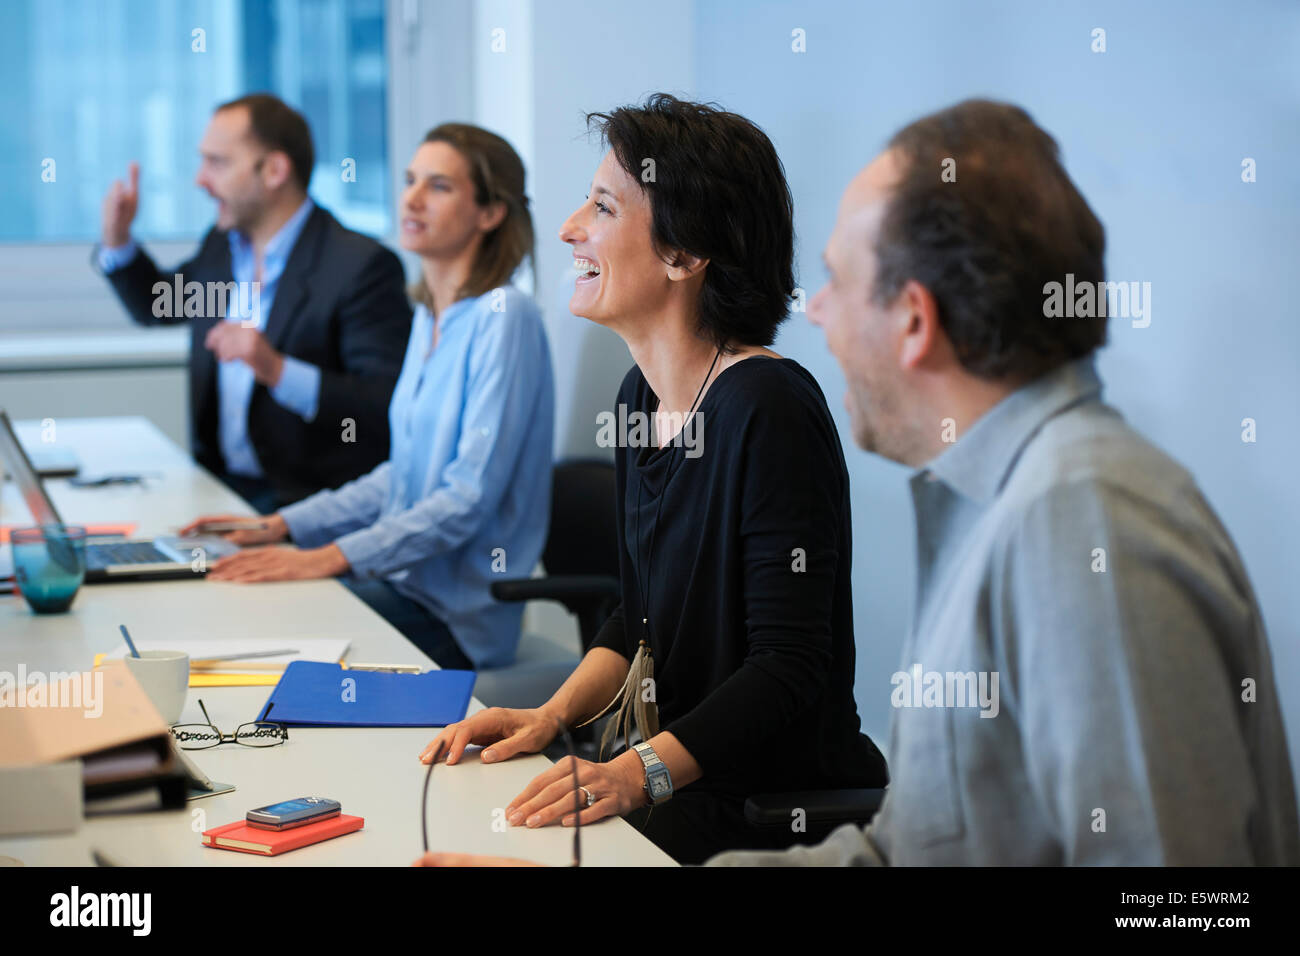 Businesspeople sitting at desk Stock Photo